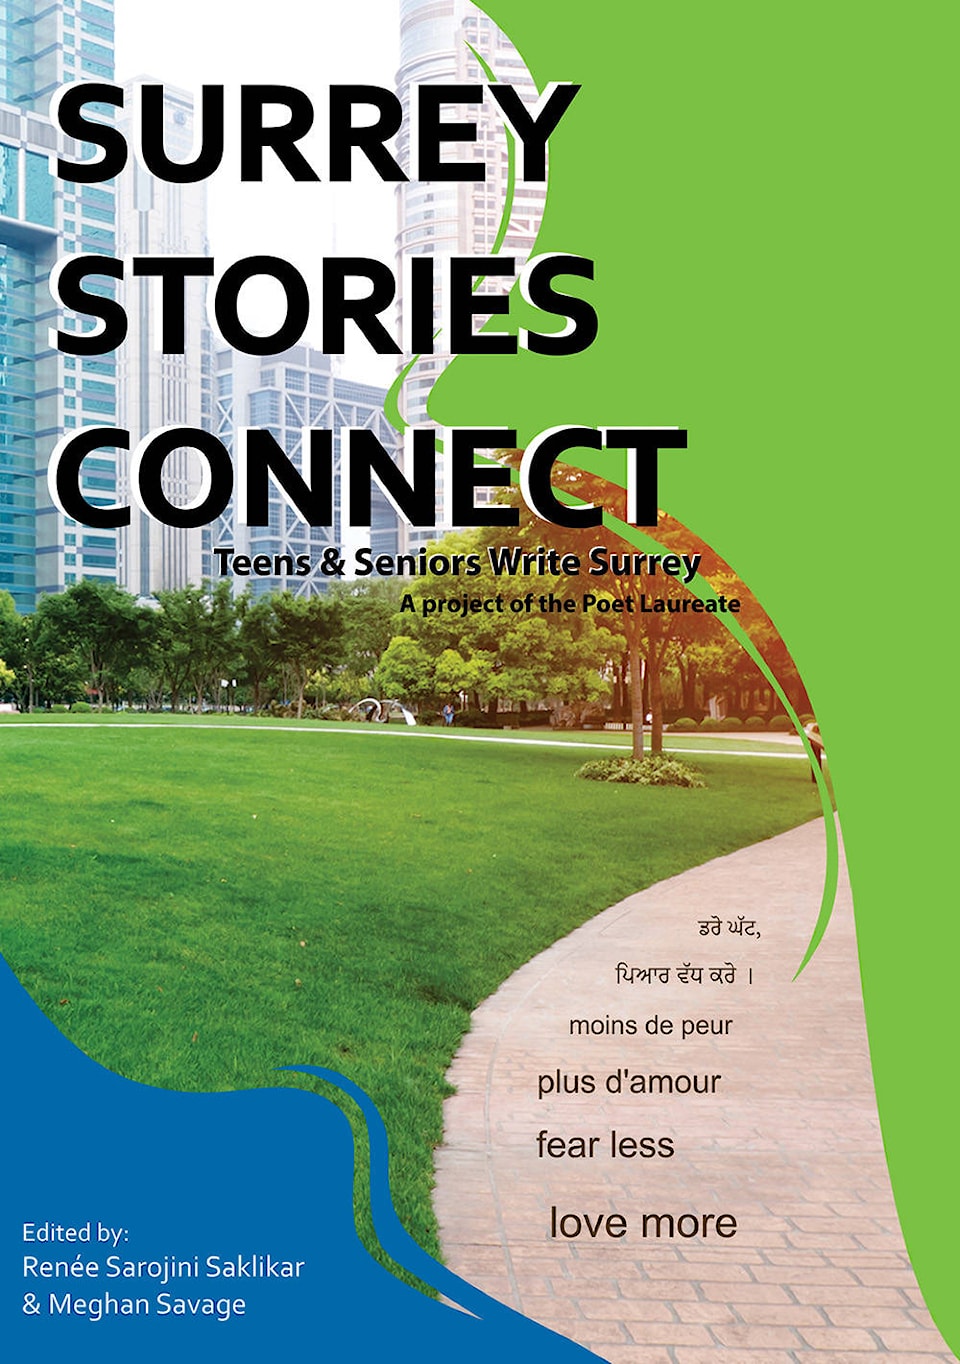 web1_Book-Cover---Surrey-Stories-Connect